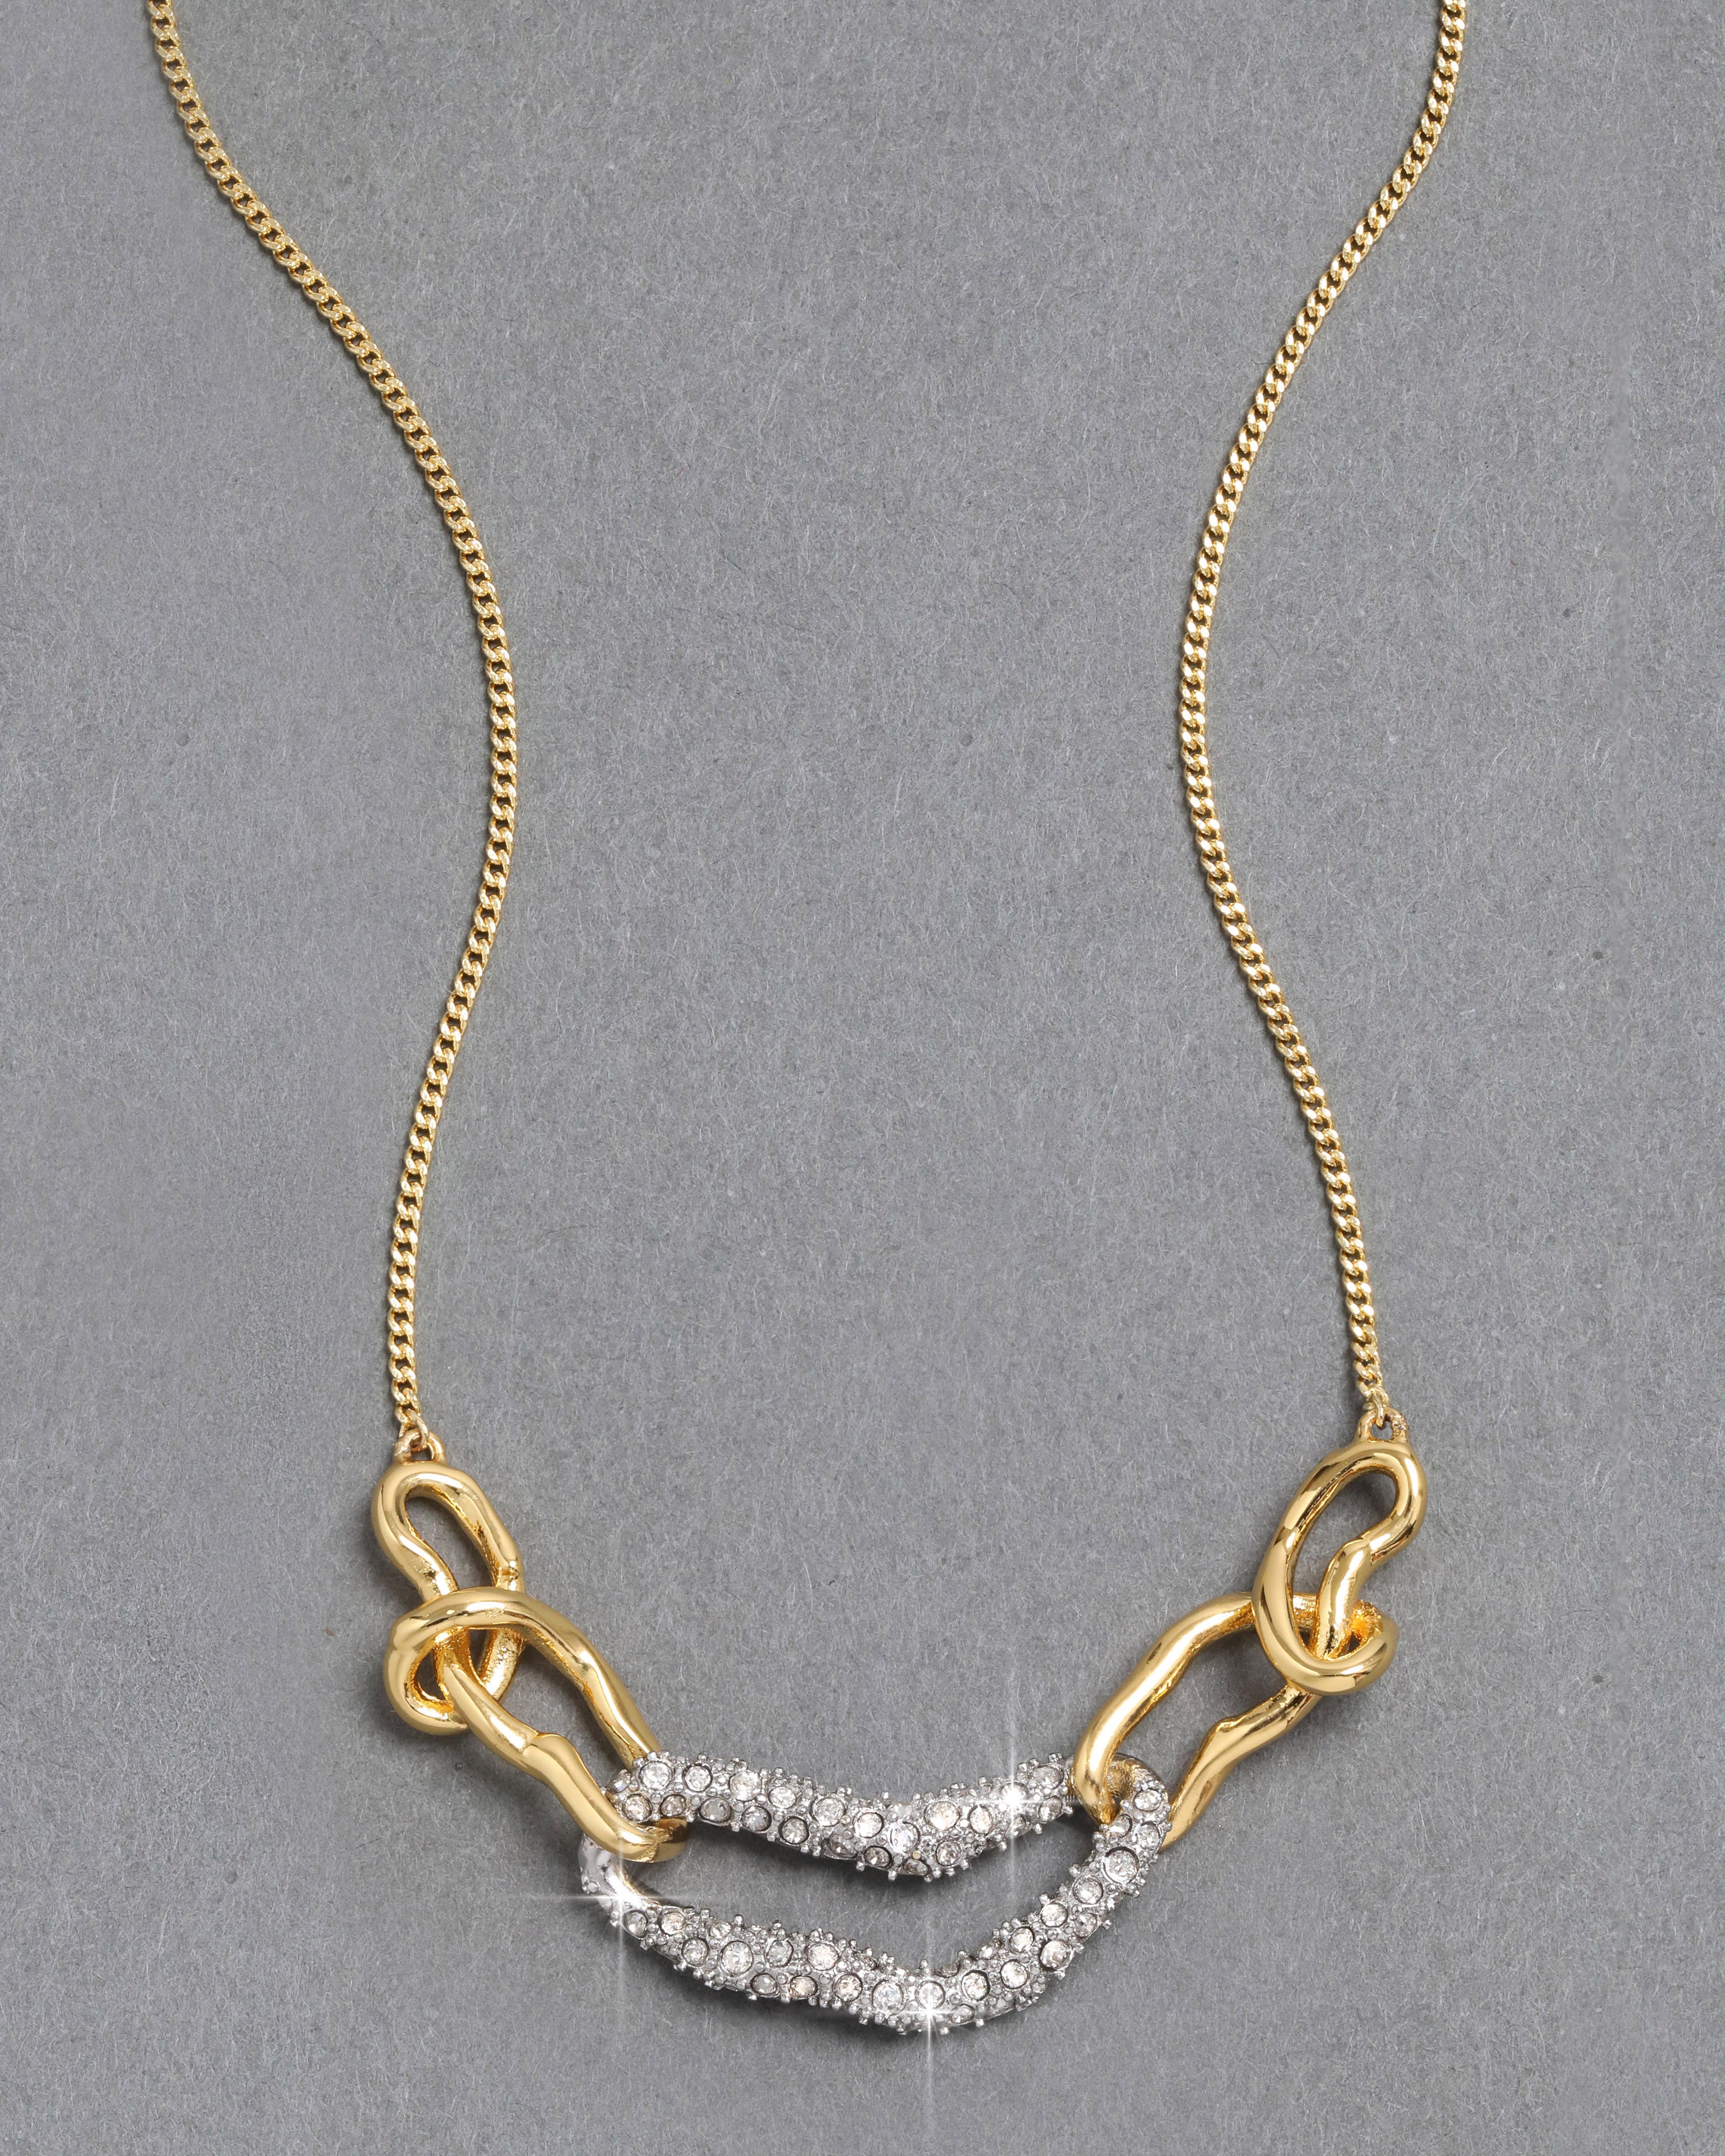 Solanales Small Link Necklace- Gold